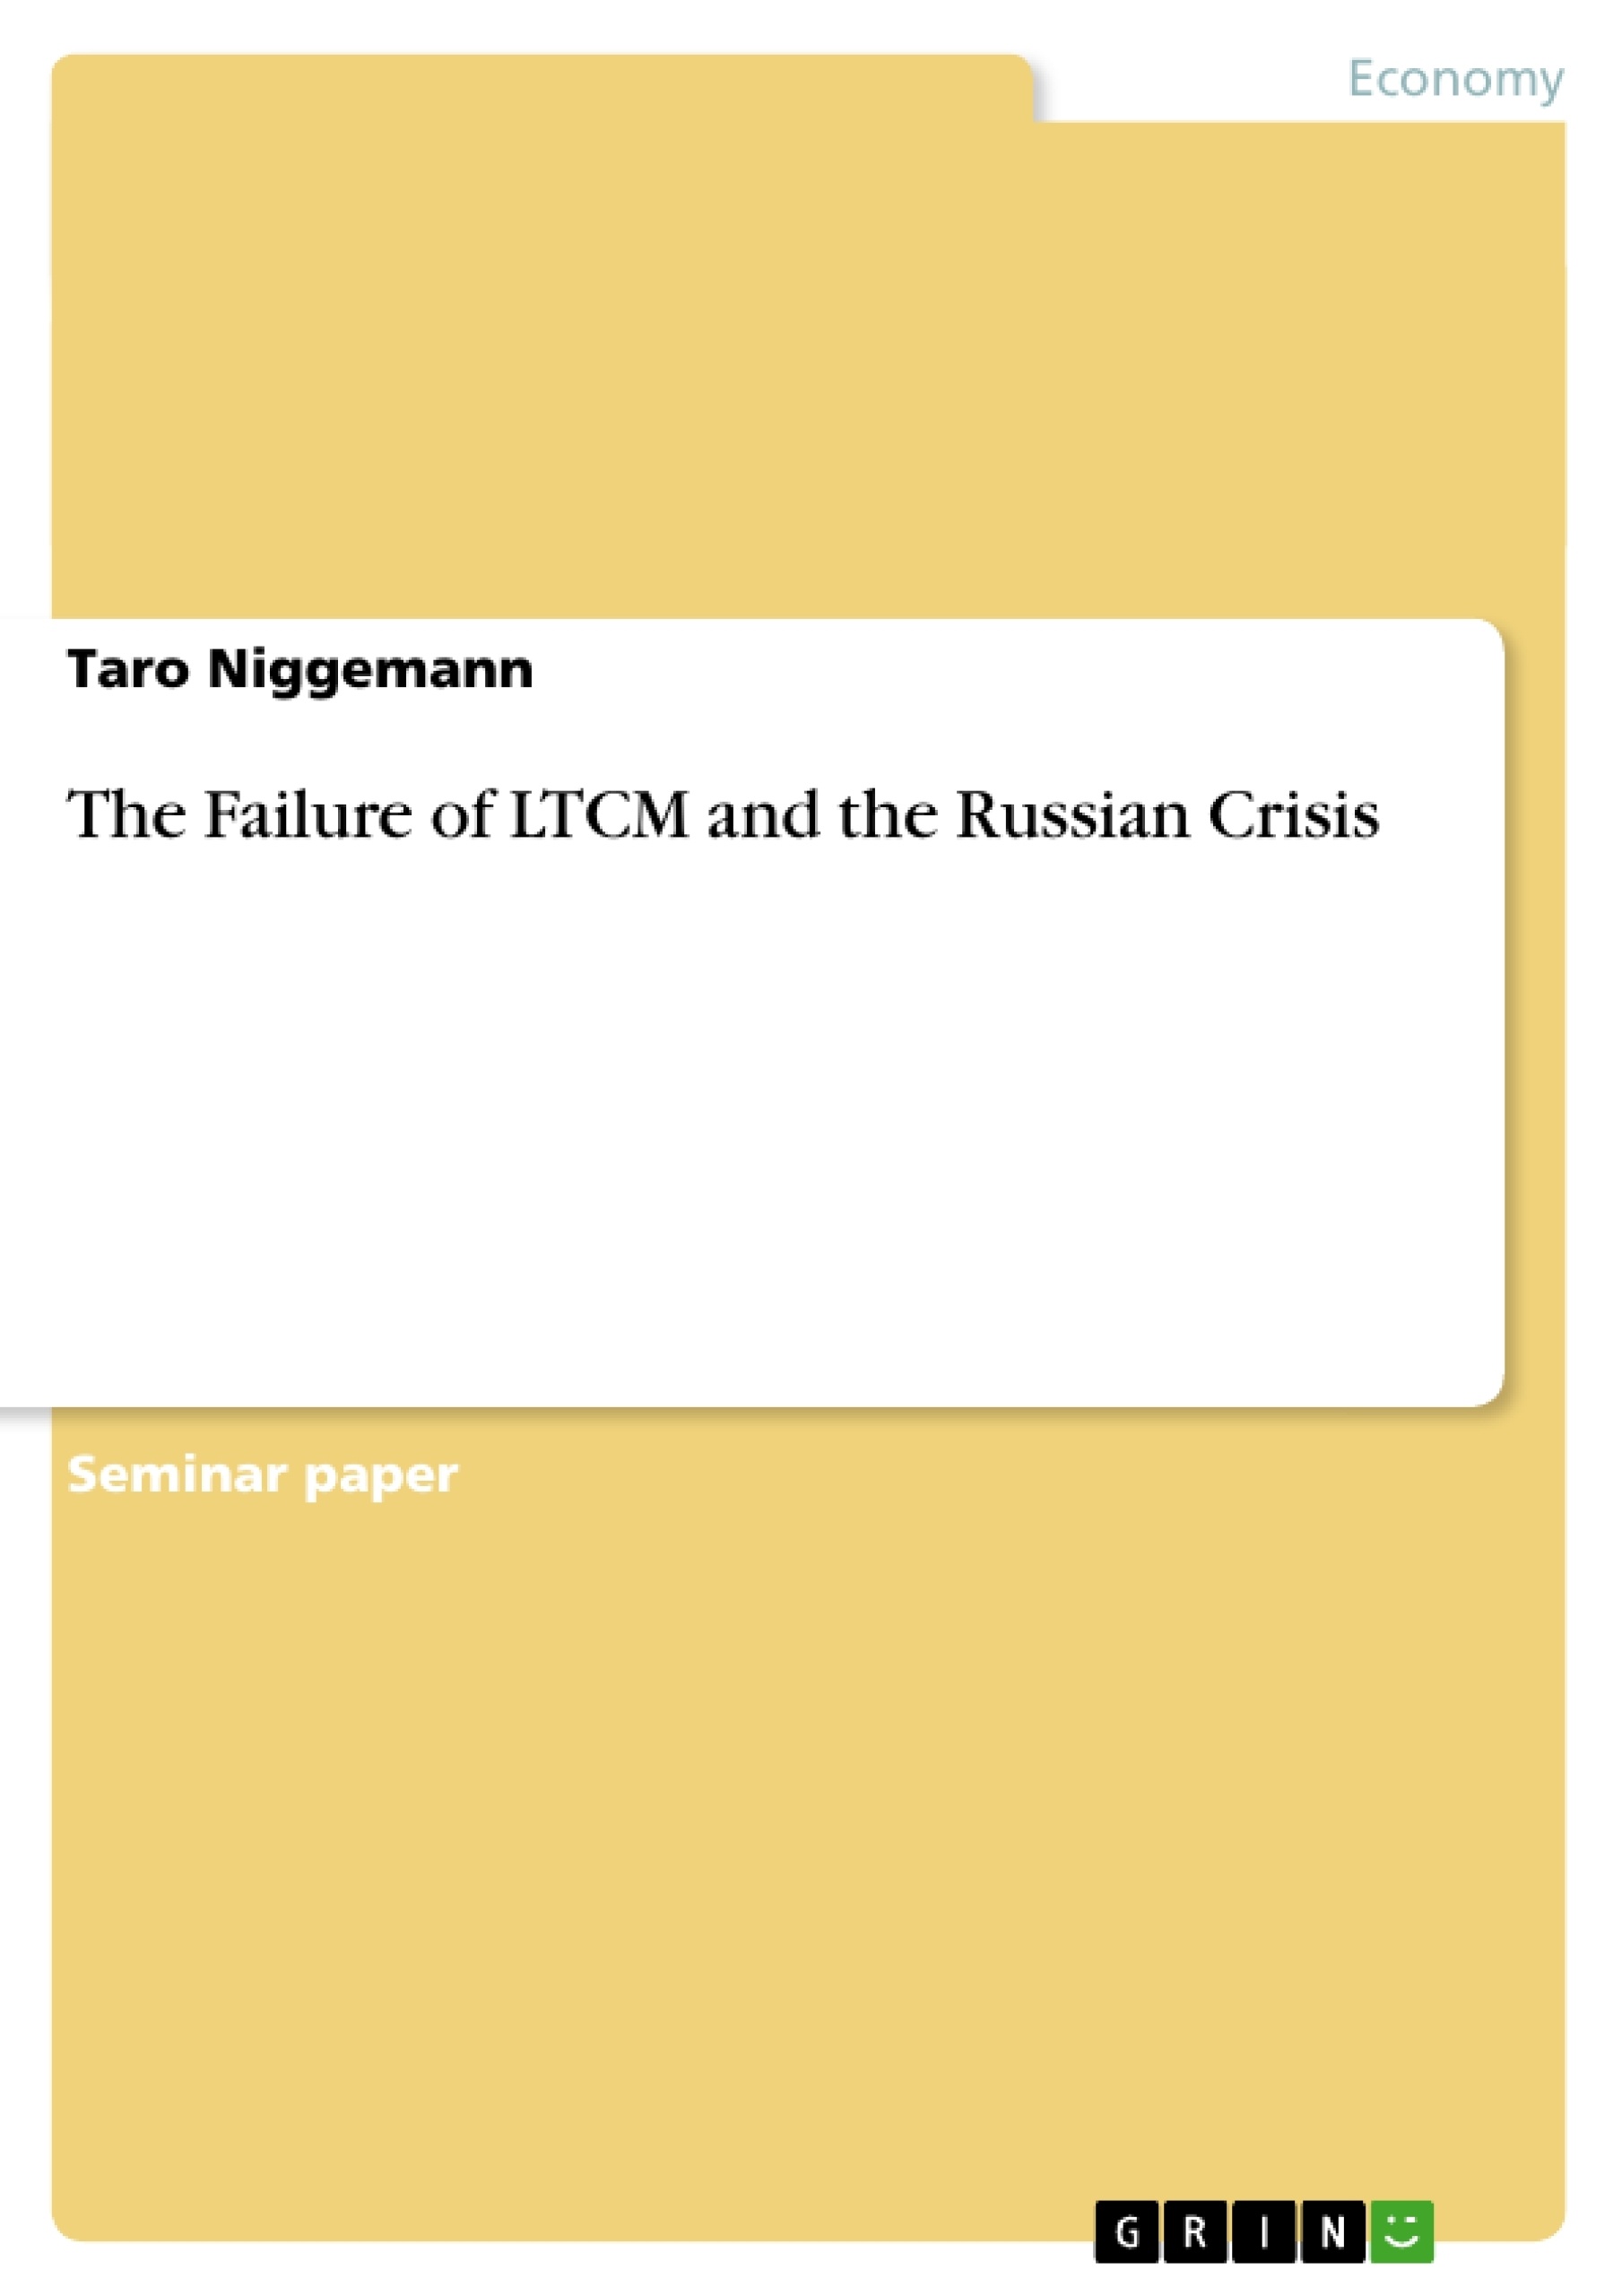 Title: The Failure of LTCM and the Russian Crisis